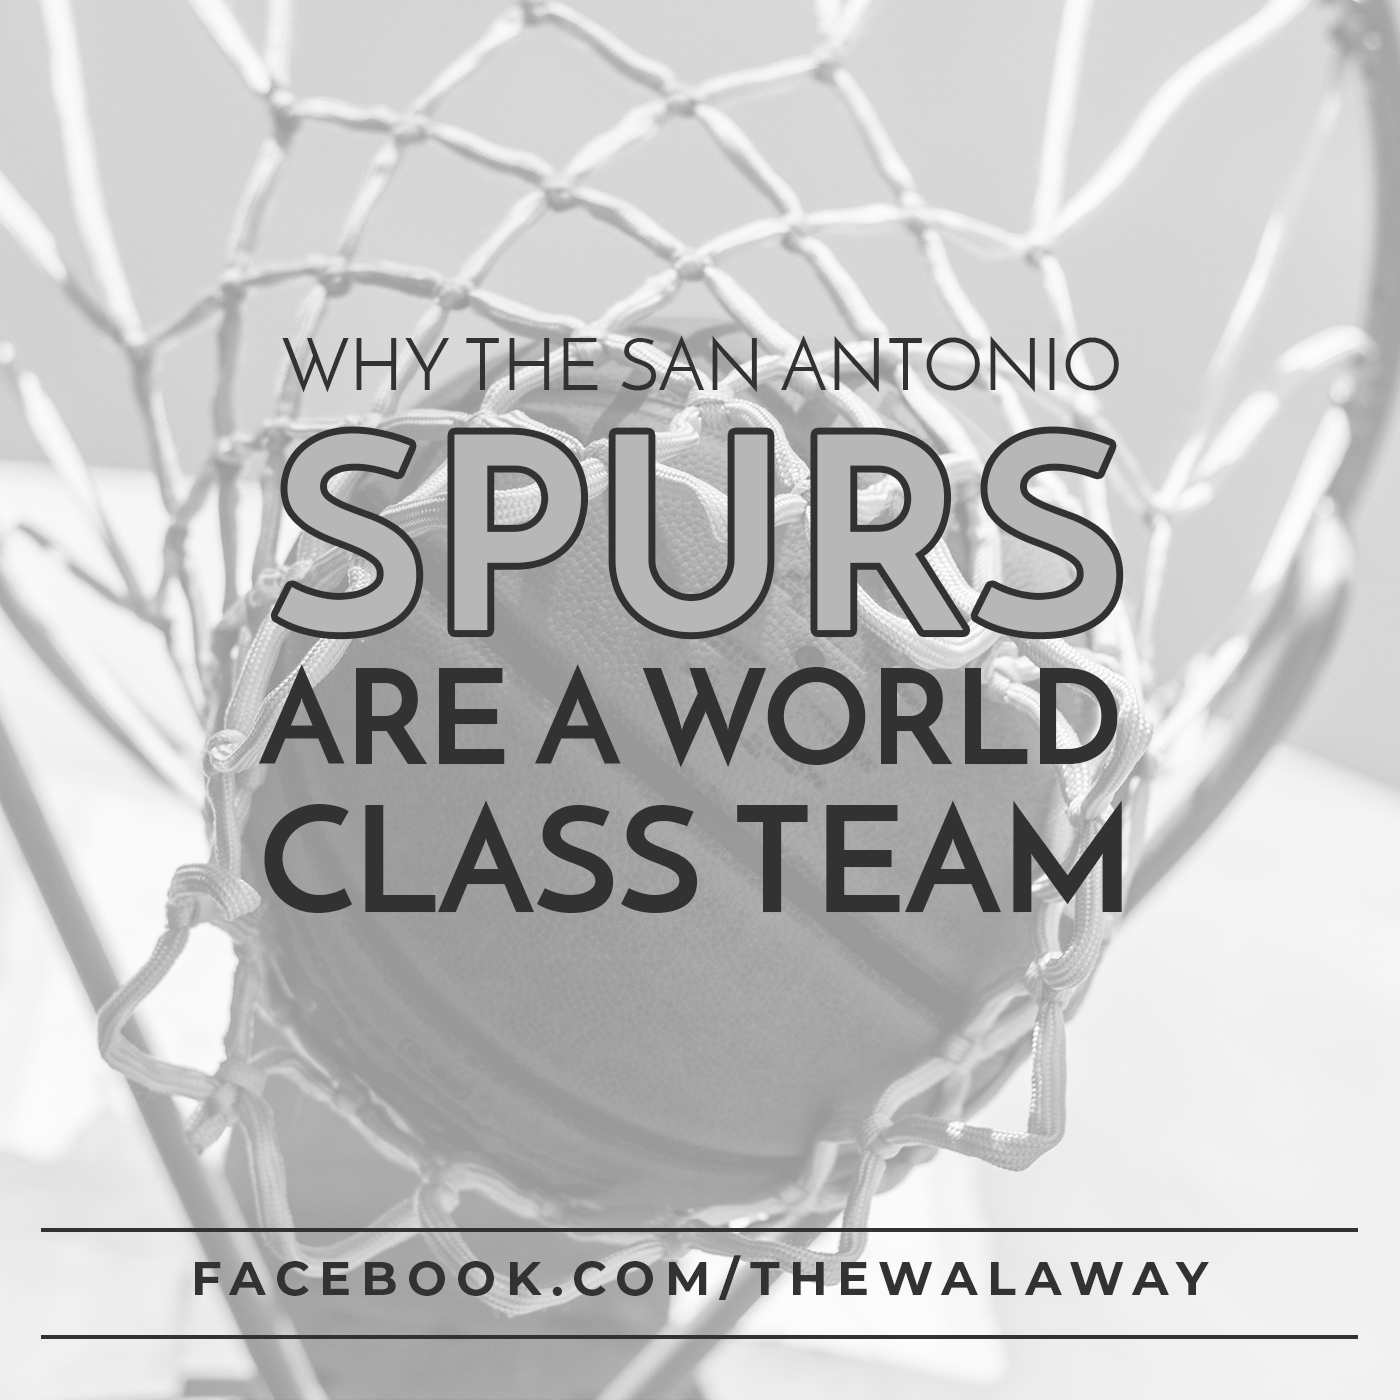 #002 - Why the Spurs are a World Class Team